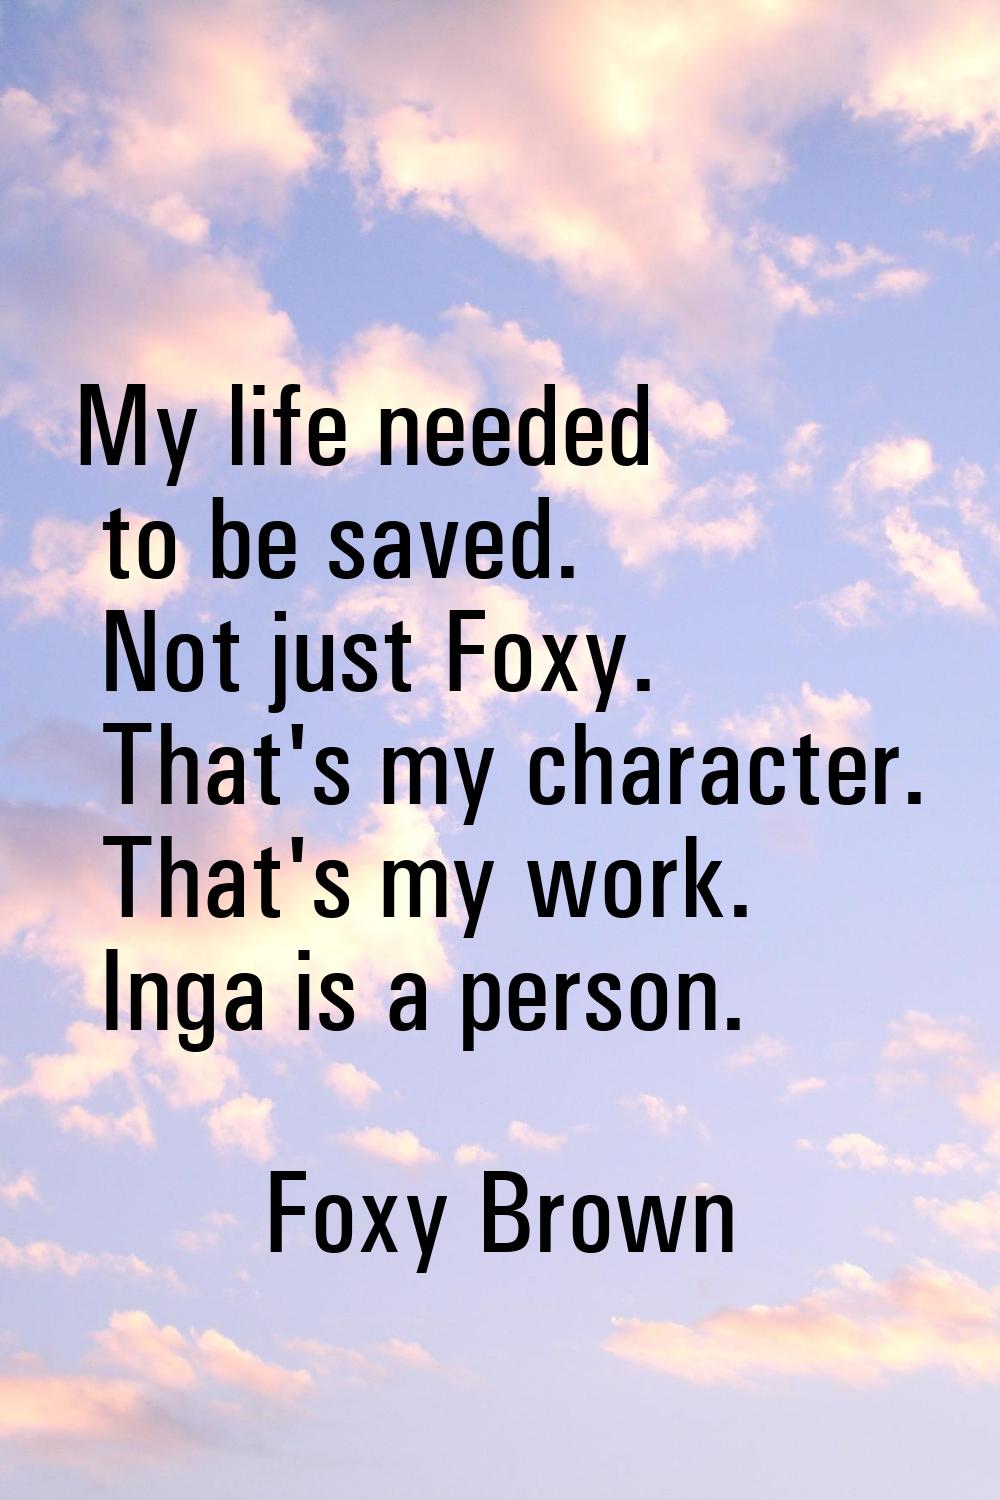 My life needed to be saved. Not just Foxy. That's my character. That's my work. Inga is a person.